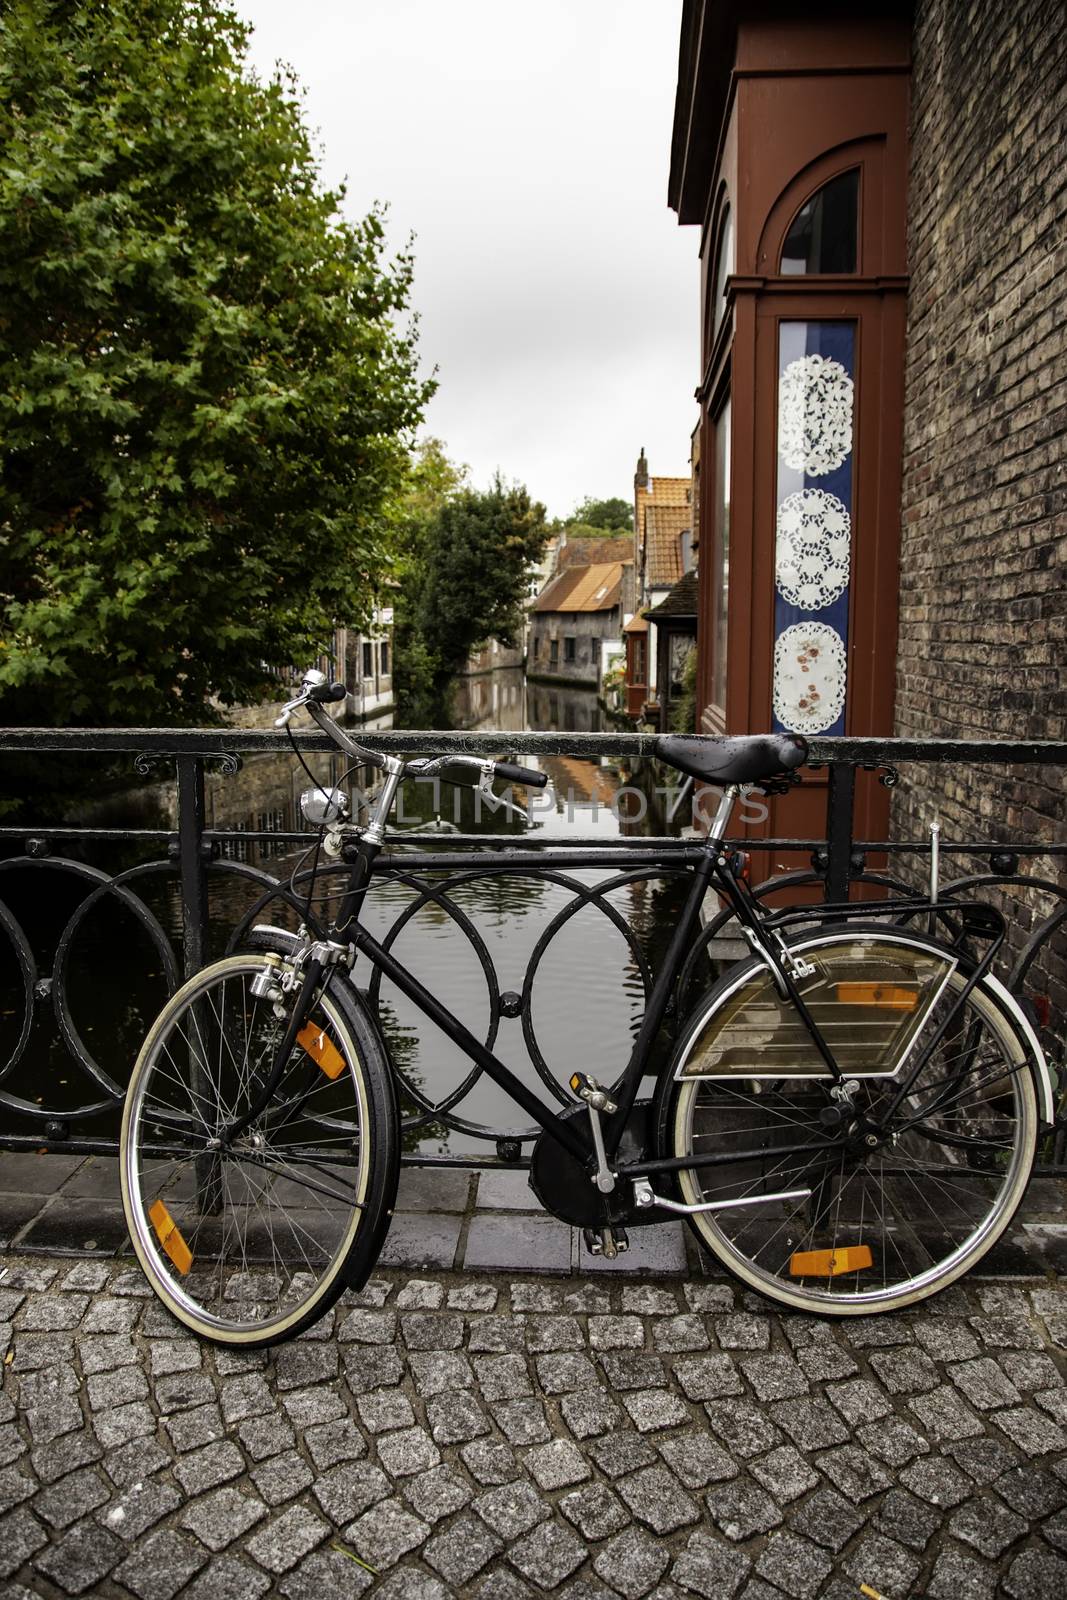 Typical bicycle in Bruges by esebene